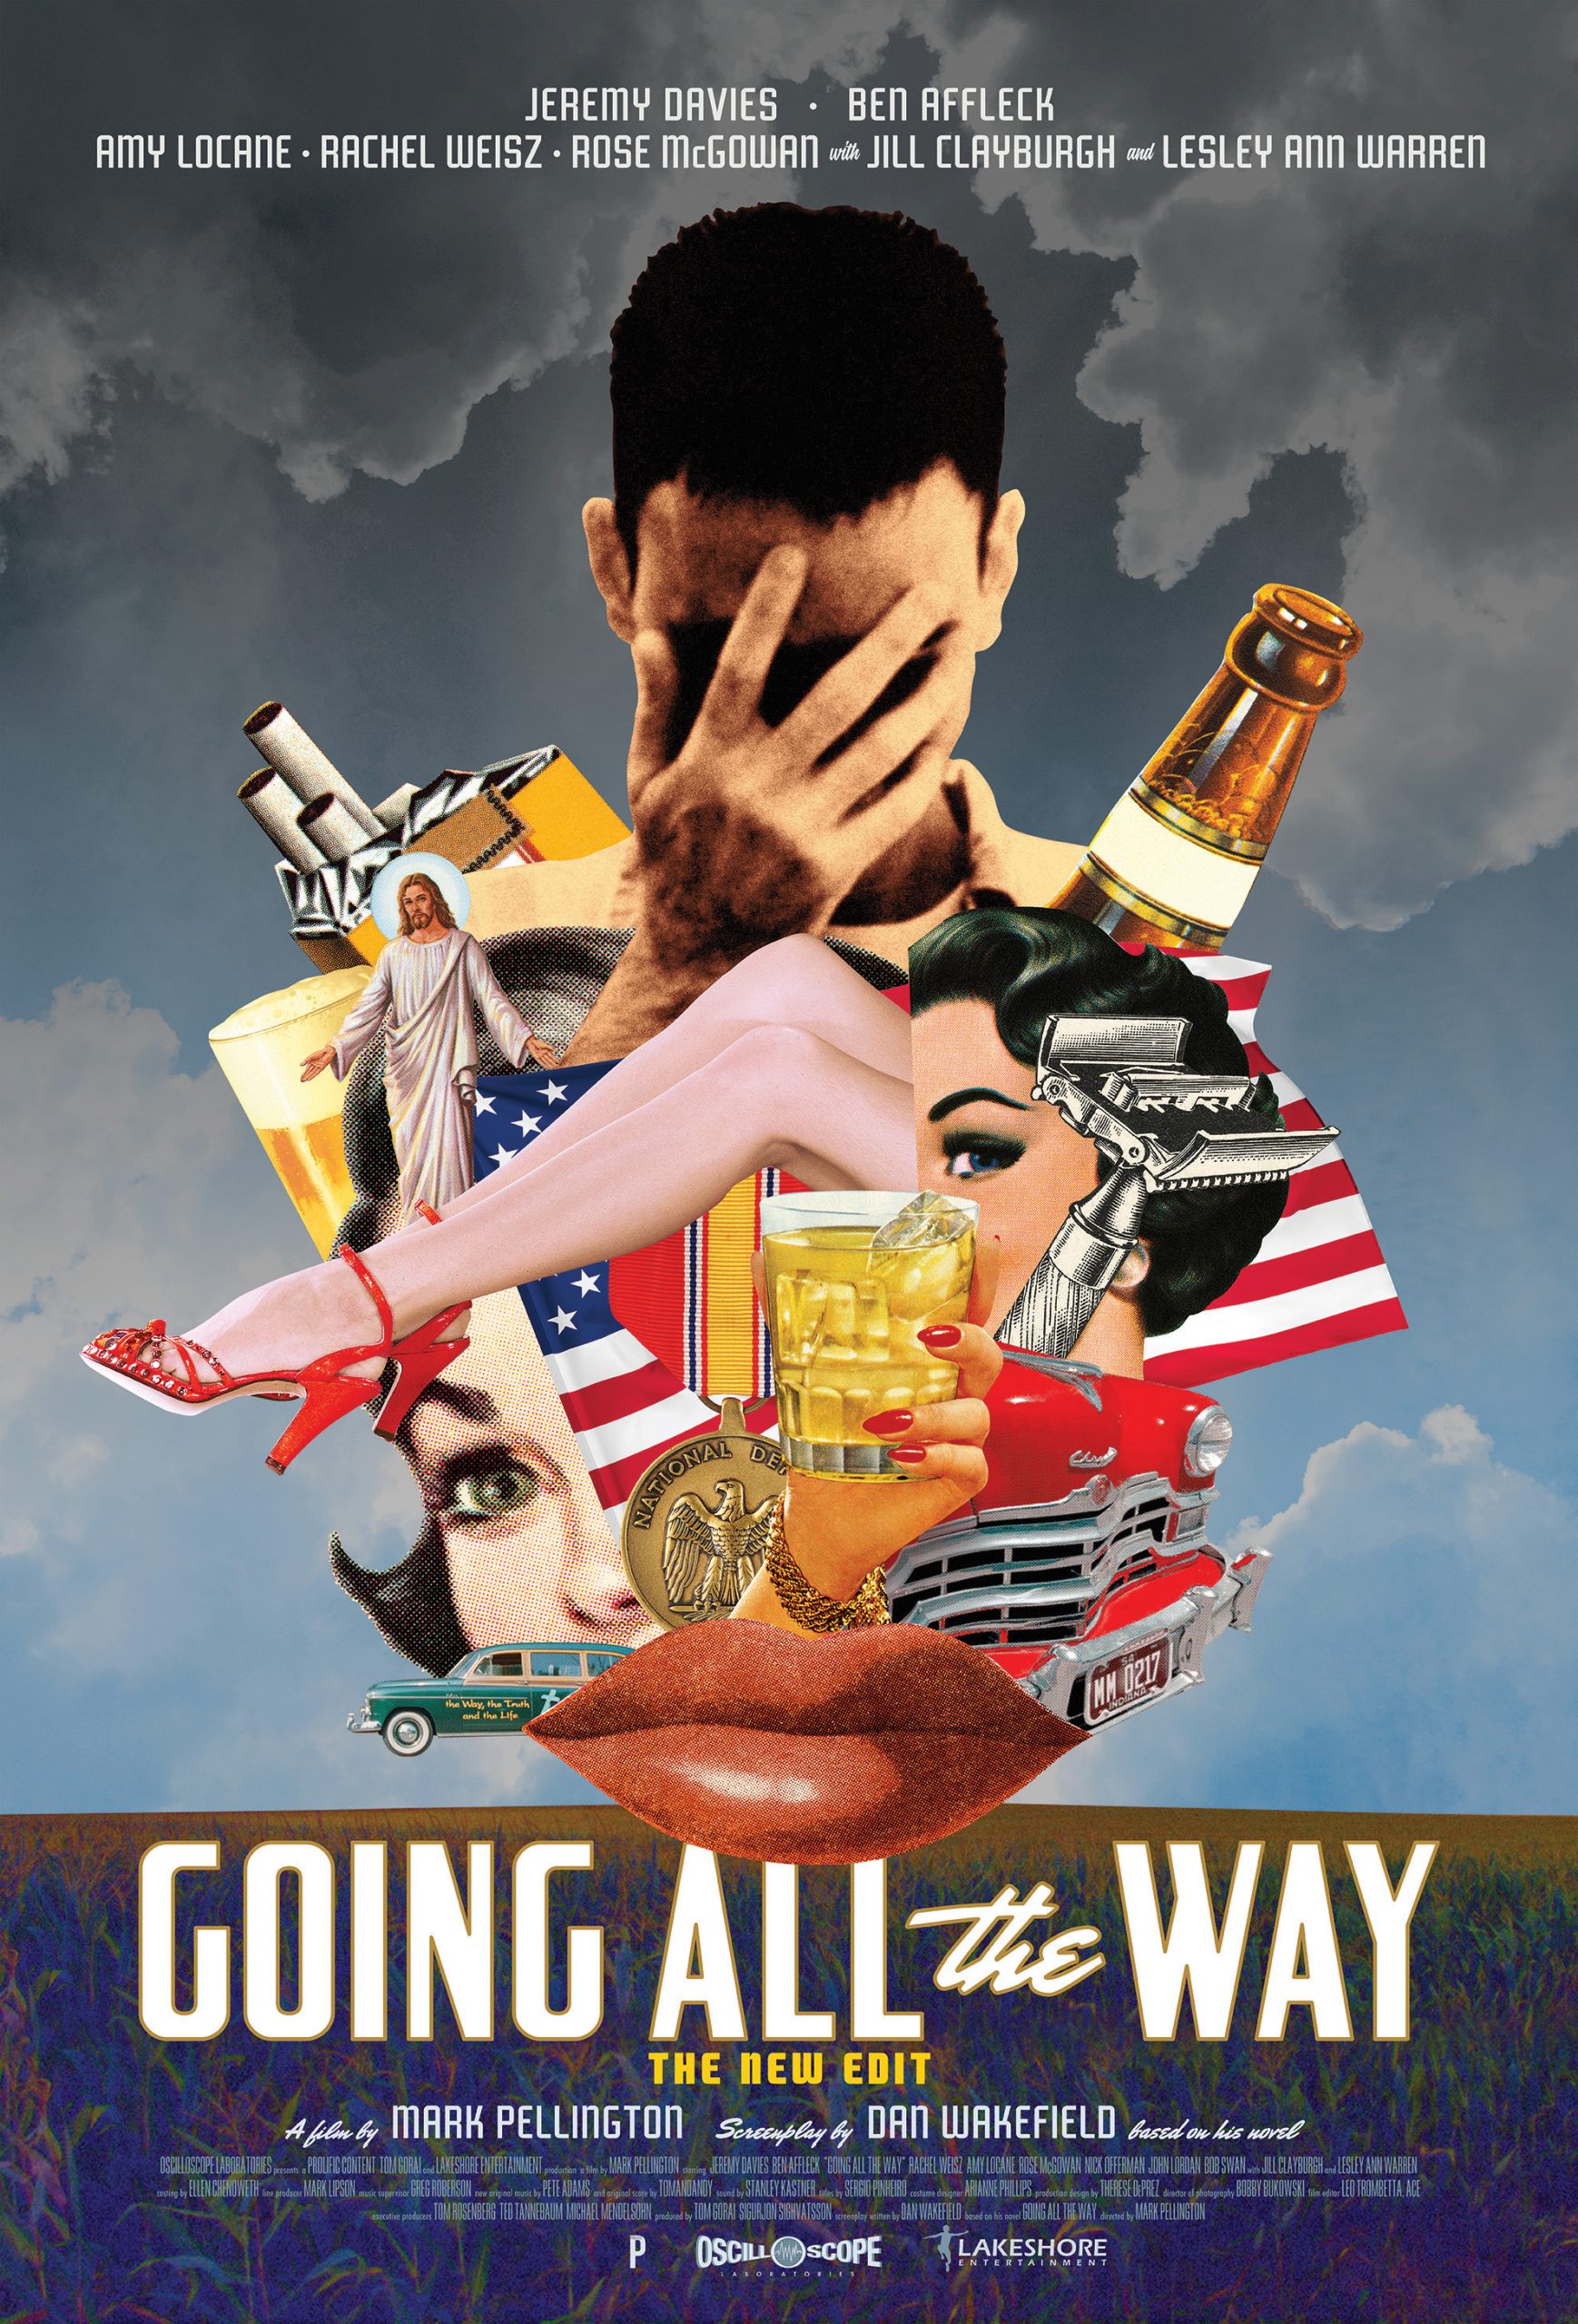 Going All the Way- The Director's Edit